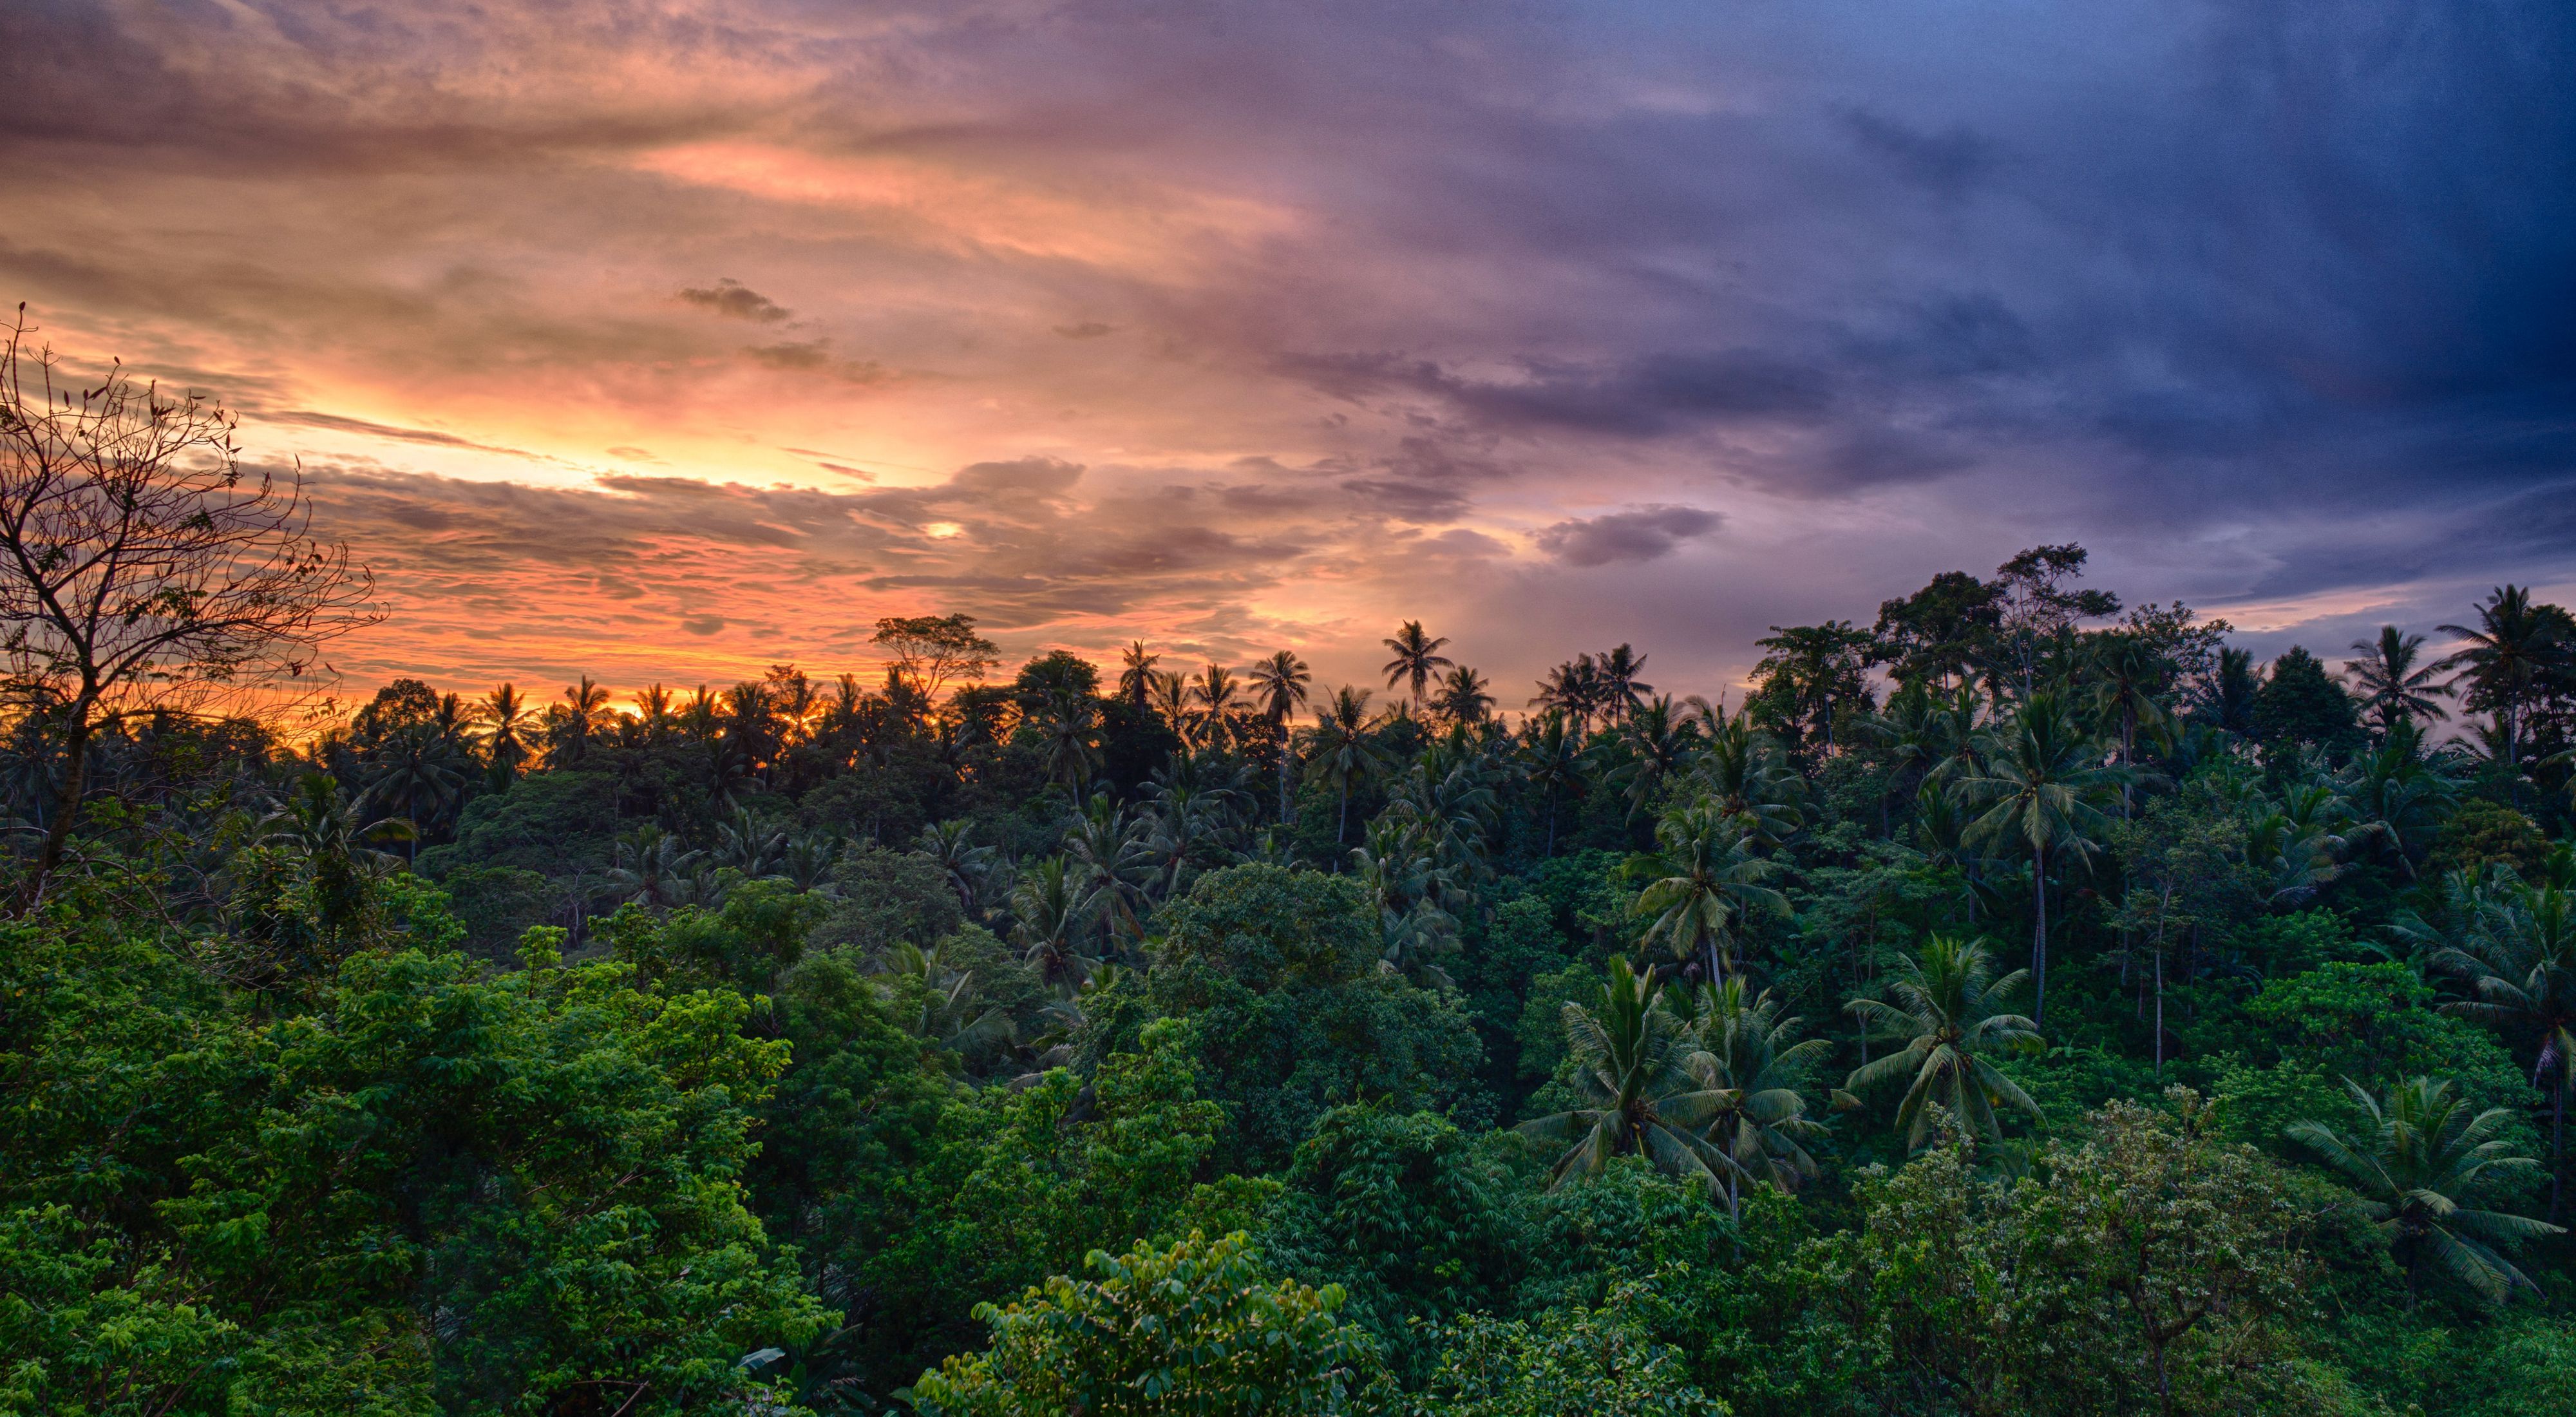 a colorful sunset over a lush, tropical forest in Indonesia